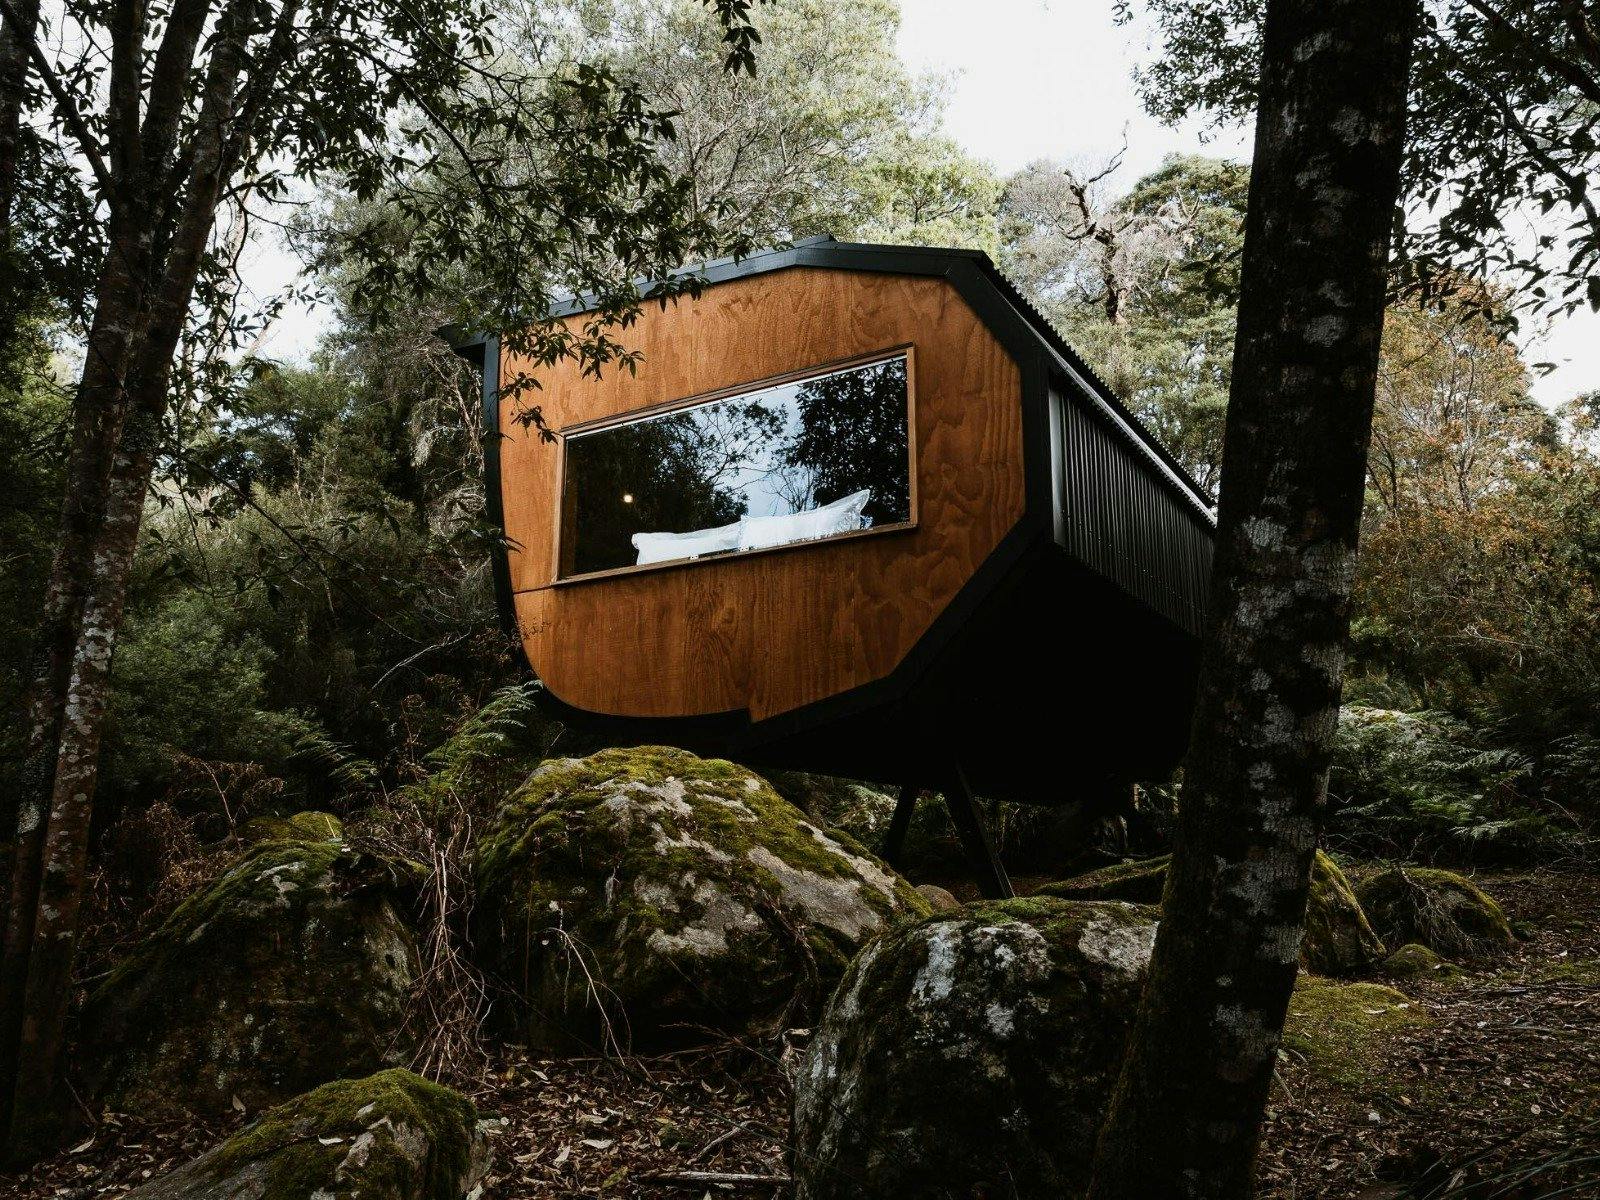 Pods accommodation in the forests of the Blue Derby Mountain Bike Trails